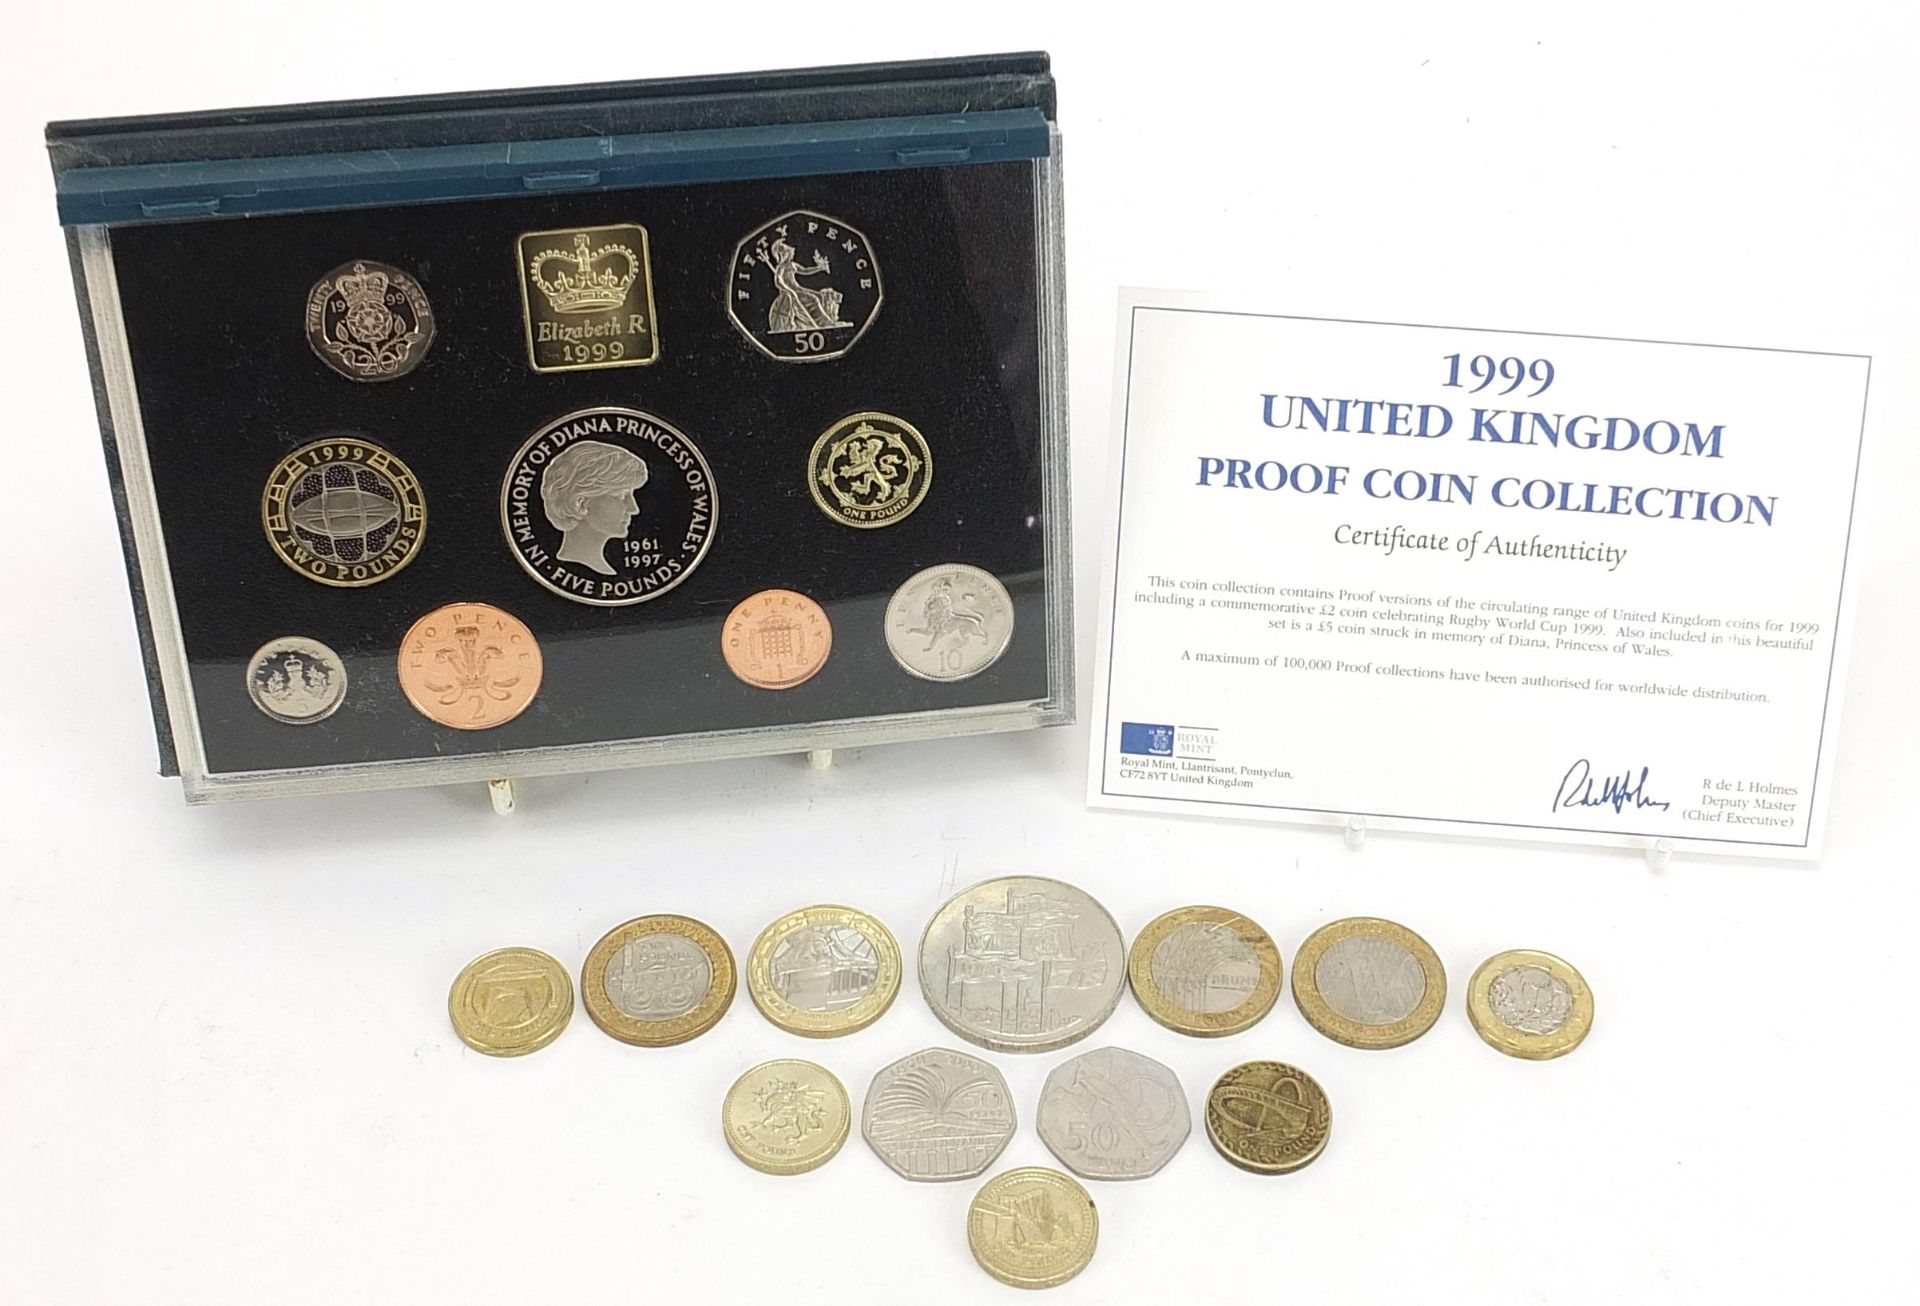 British coinage including Royal Mail 1999 proof coin collection, five pound coins and one pound